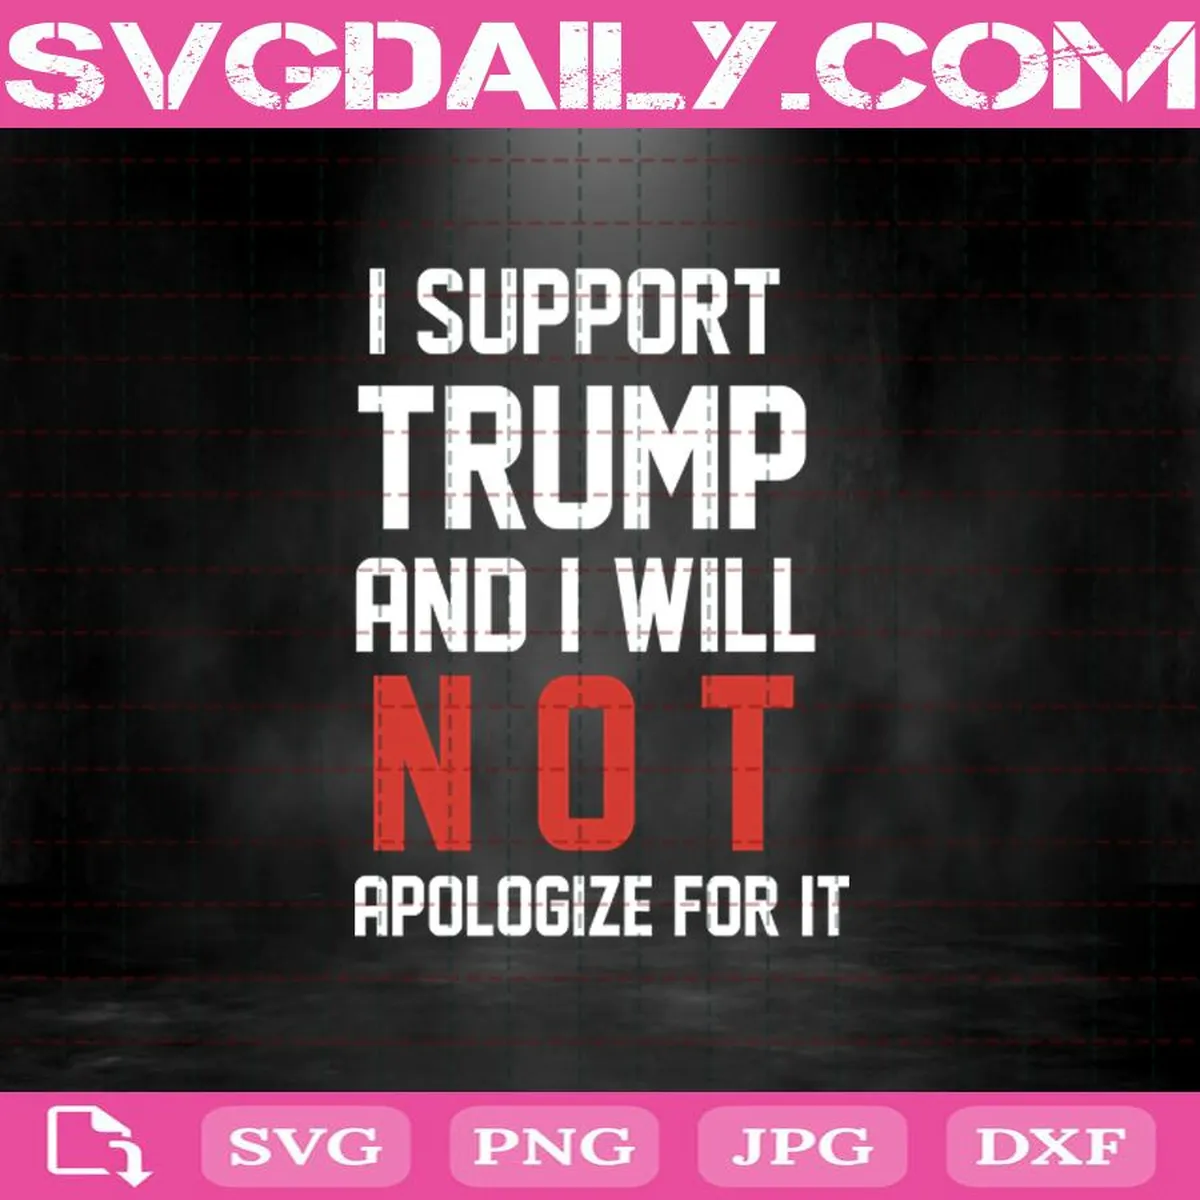 I Suport Trump And I Will Not Apologize For It Svg, Trump Svg, Donald Trump Svg, Support Trump Svg, Trump For President Svg